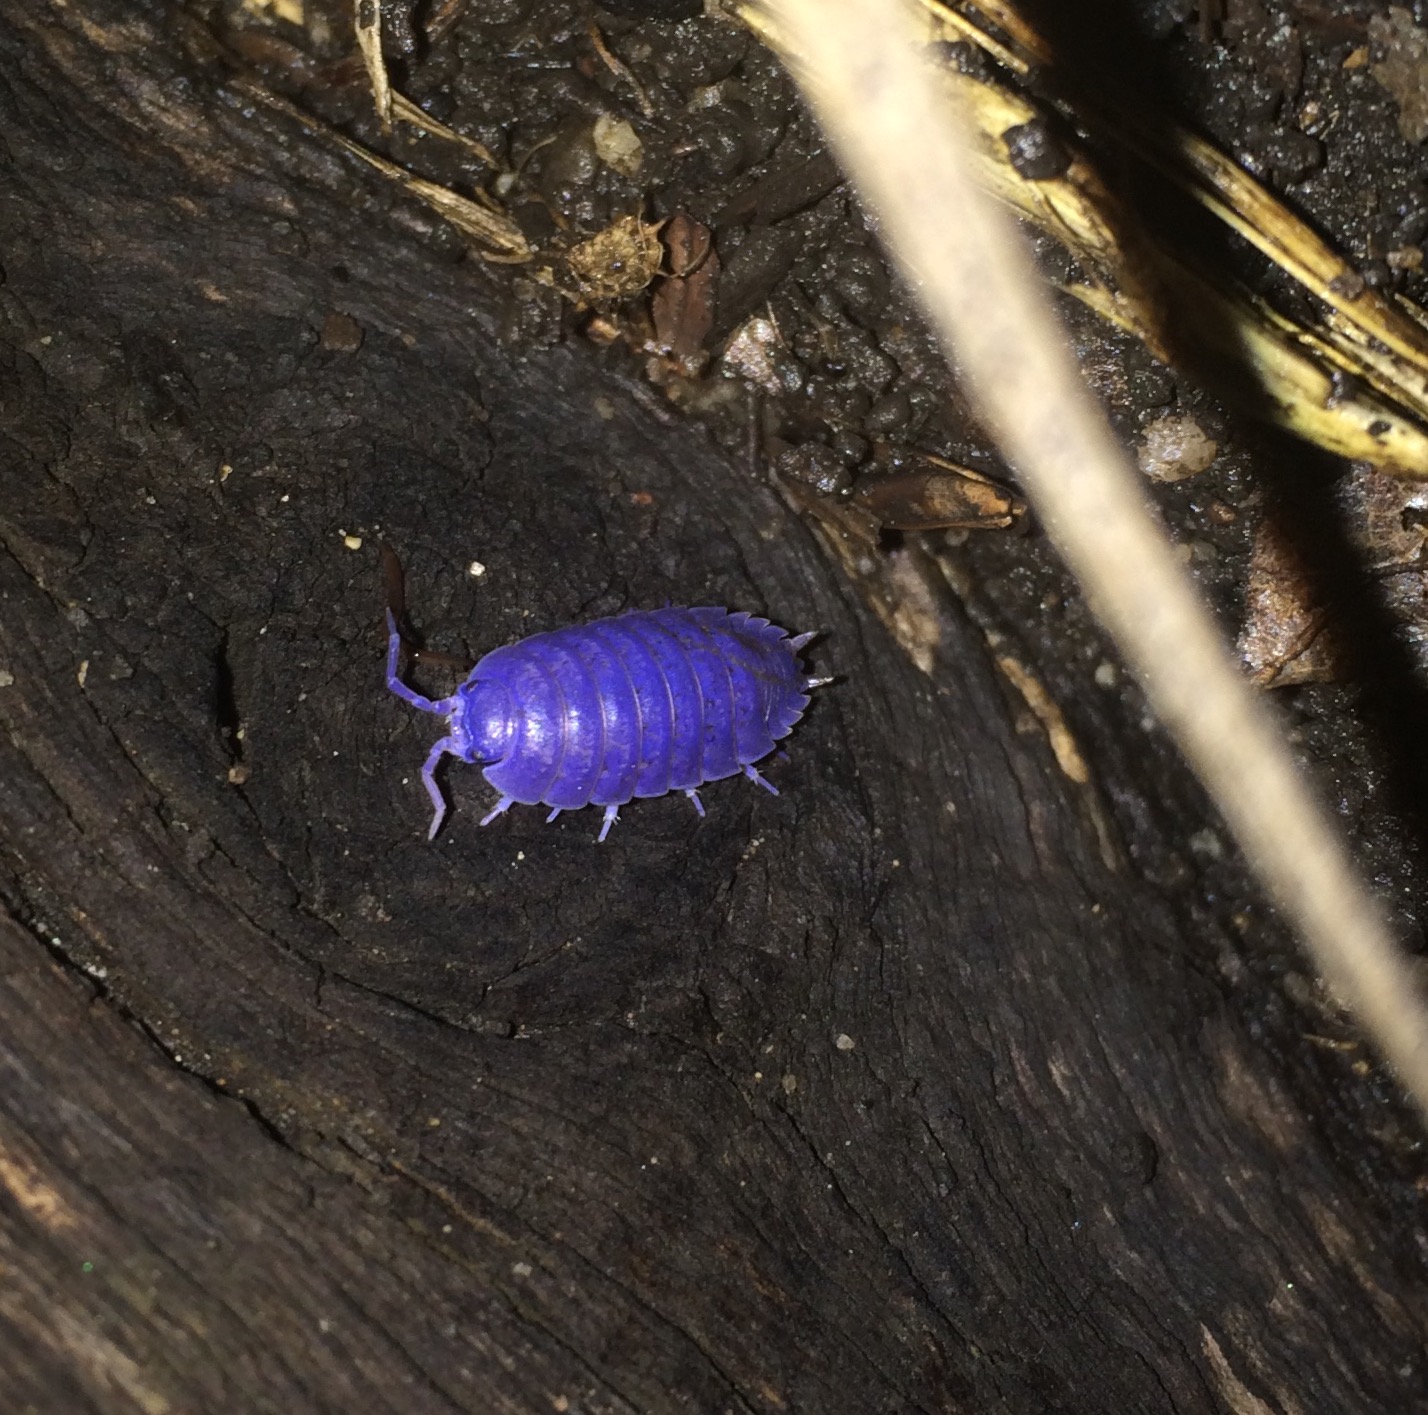 The strange case of the blue bug that’s not a bug